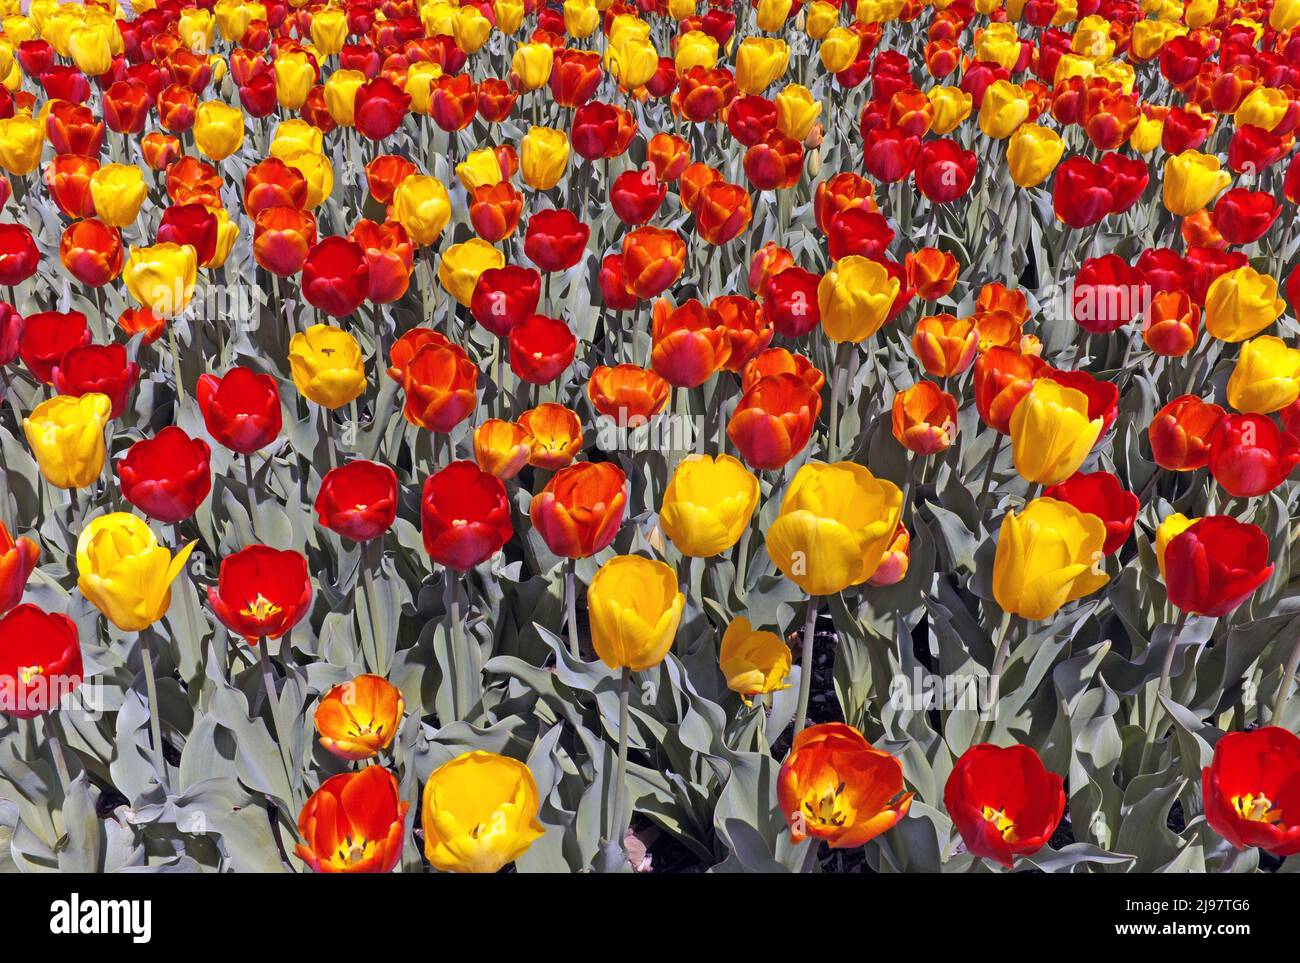 A field of yellow and red flowering tulips. Stock Photo